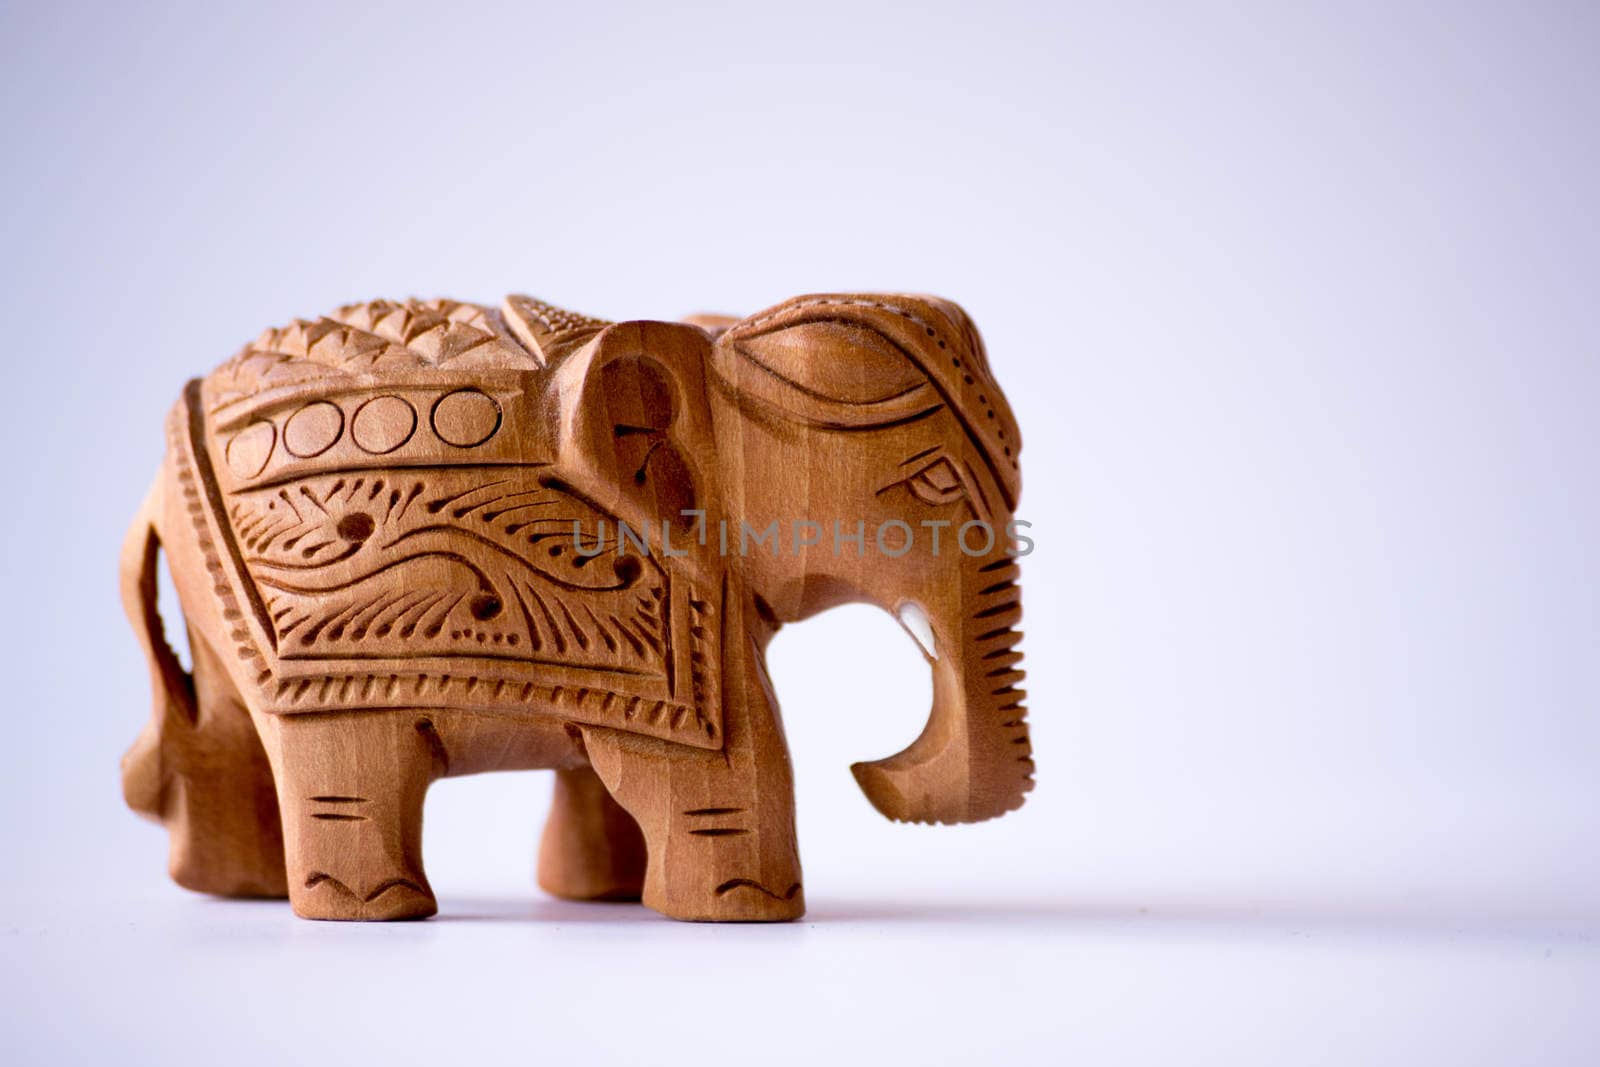 Wooden elephant, a typical souvenir from India